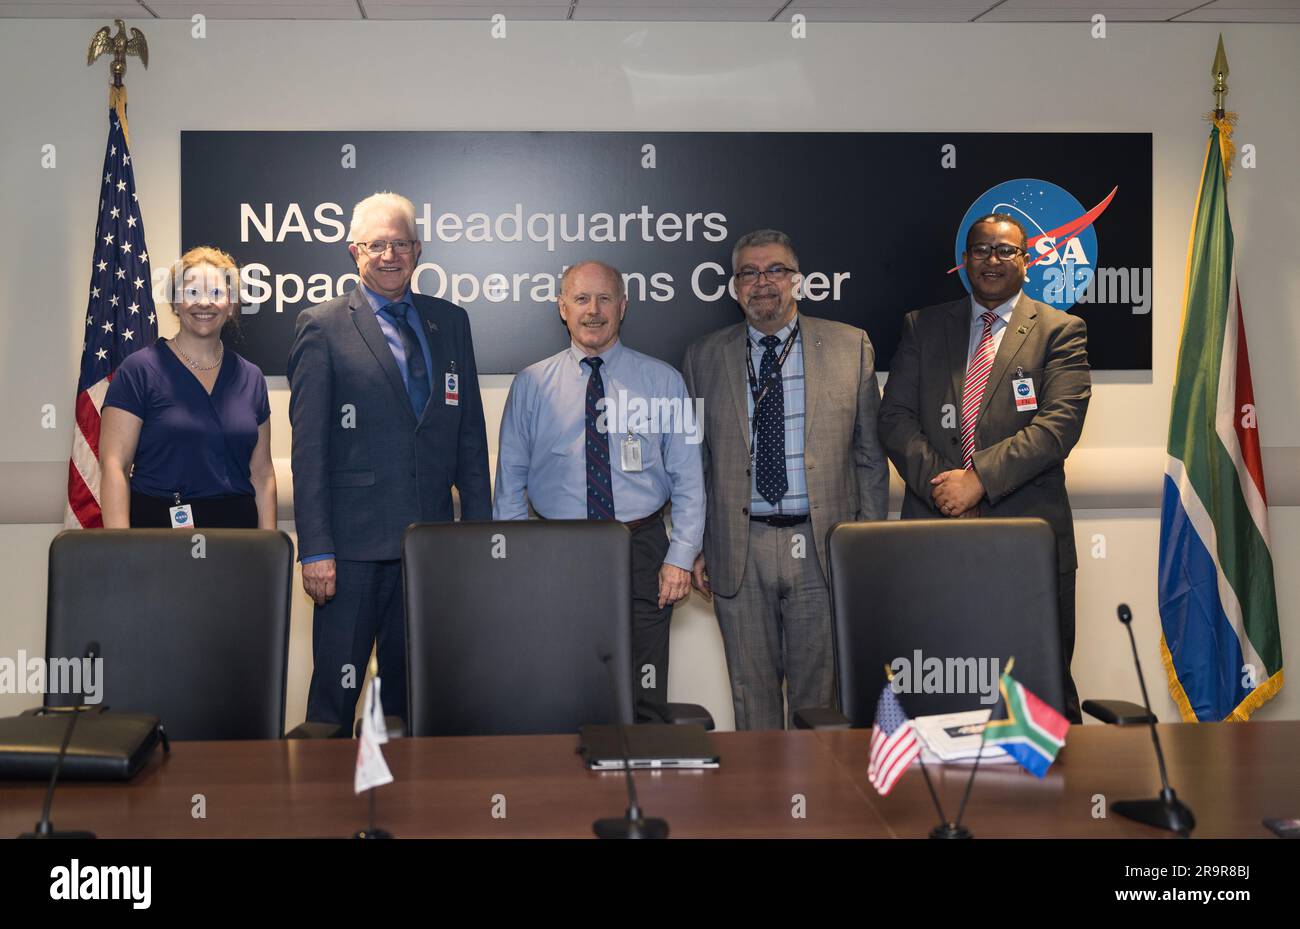 Meeting with Western Cape Government’s Alan Winde. From left to right, Provincial Minister for Finance and Economic Opportunities of the Western Cape Government, Mireille Wenger, Premier of the Western Cape Government, Alan Winde, NASA Associate Administrator for the Space Operations Mission Directorate, Ken Bowersox, NASA Deputy Associate Administrator for Space Communications and Navigation, Badri Younes, and Director-General of the Western Cape Government, Dr. Harry Malila, pose for a photo in the Space Operations Center during a meeting with NASA and Western Cape Government representatives Stock Photo